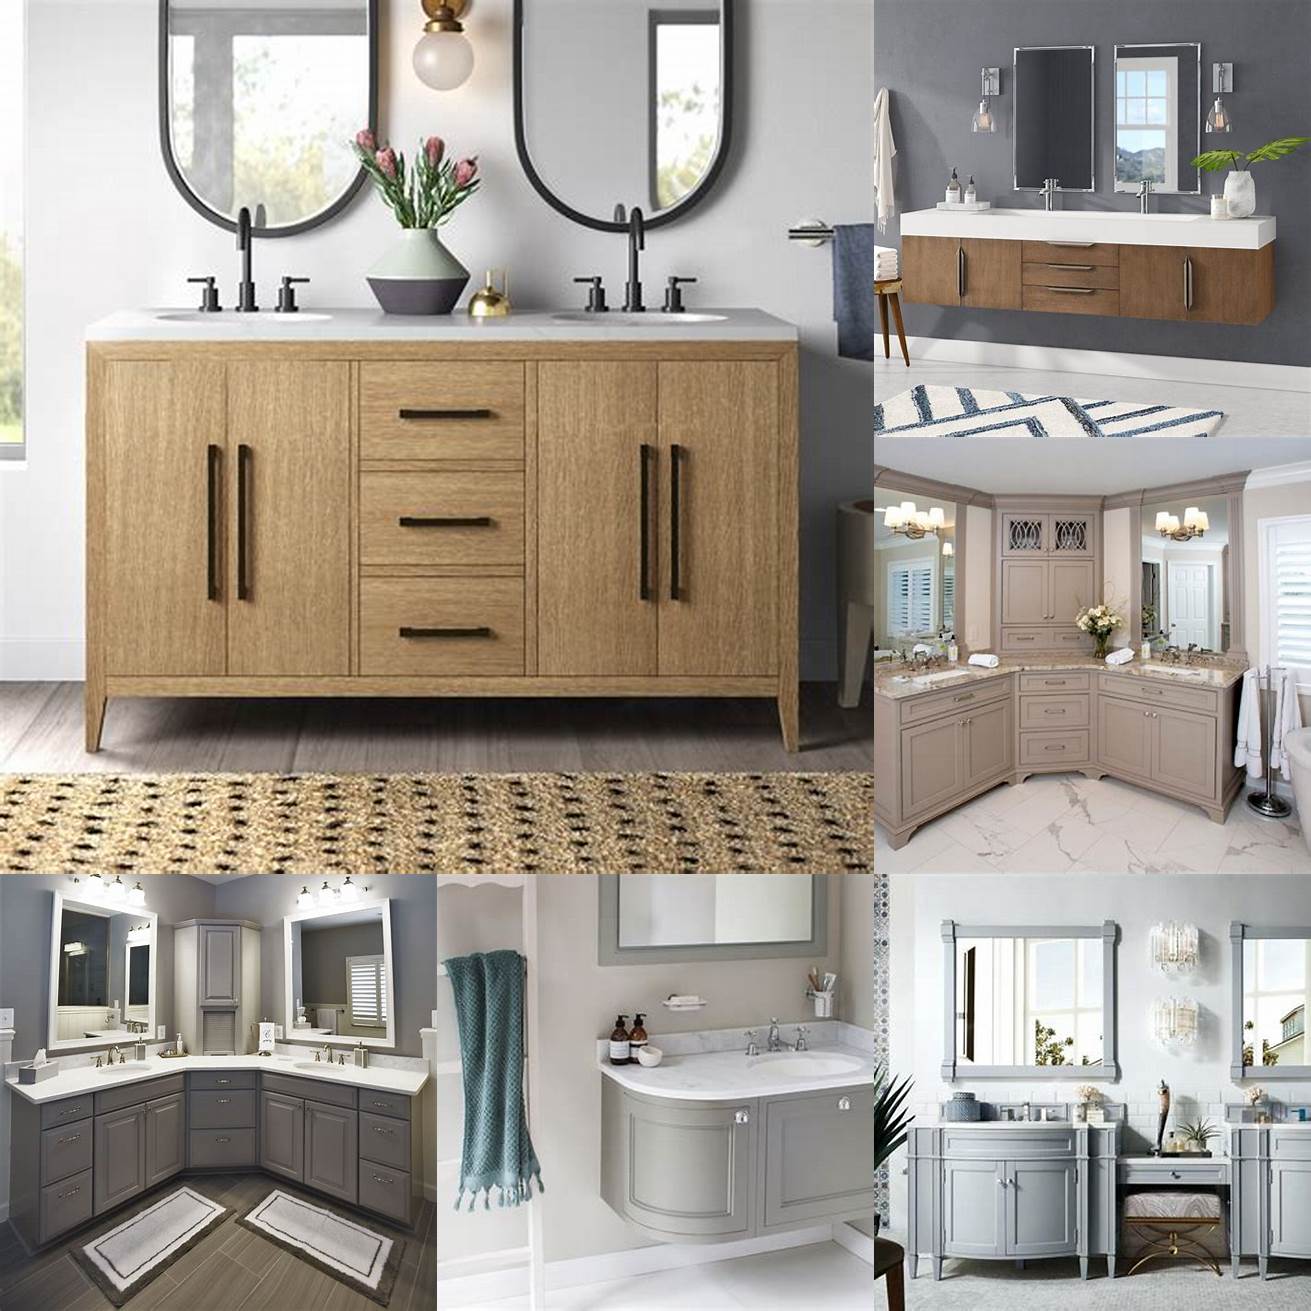 Flexibility You can choose between different configurations such as freestanding wall-mounted or corner double vanities depending on your bathrooms size and layout